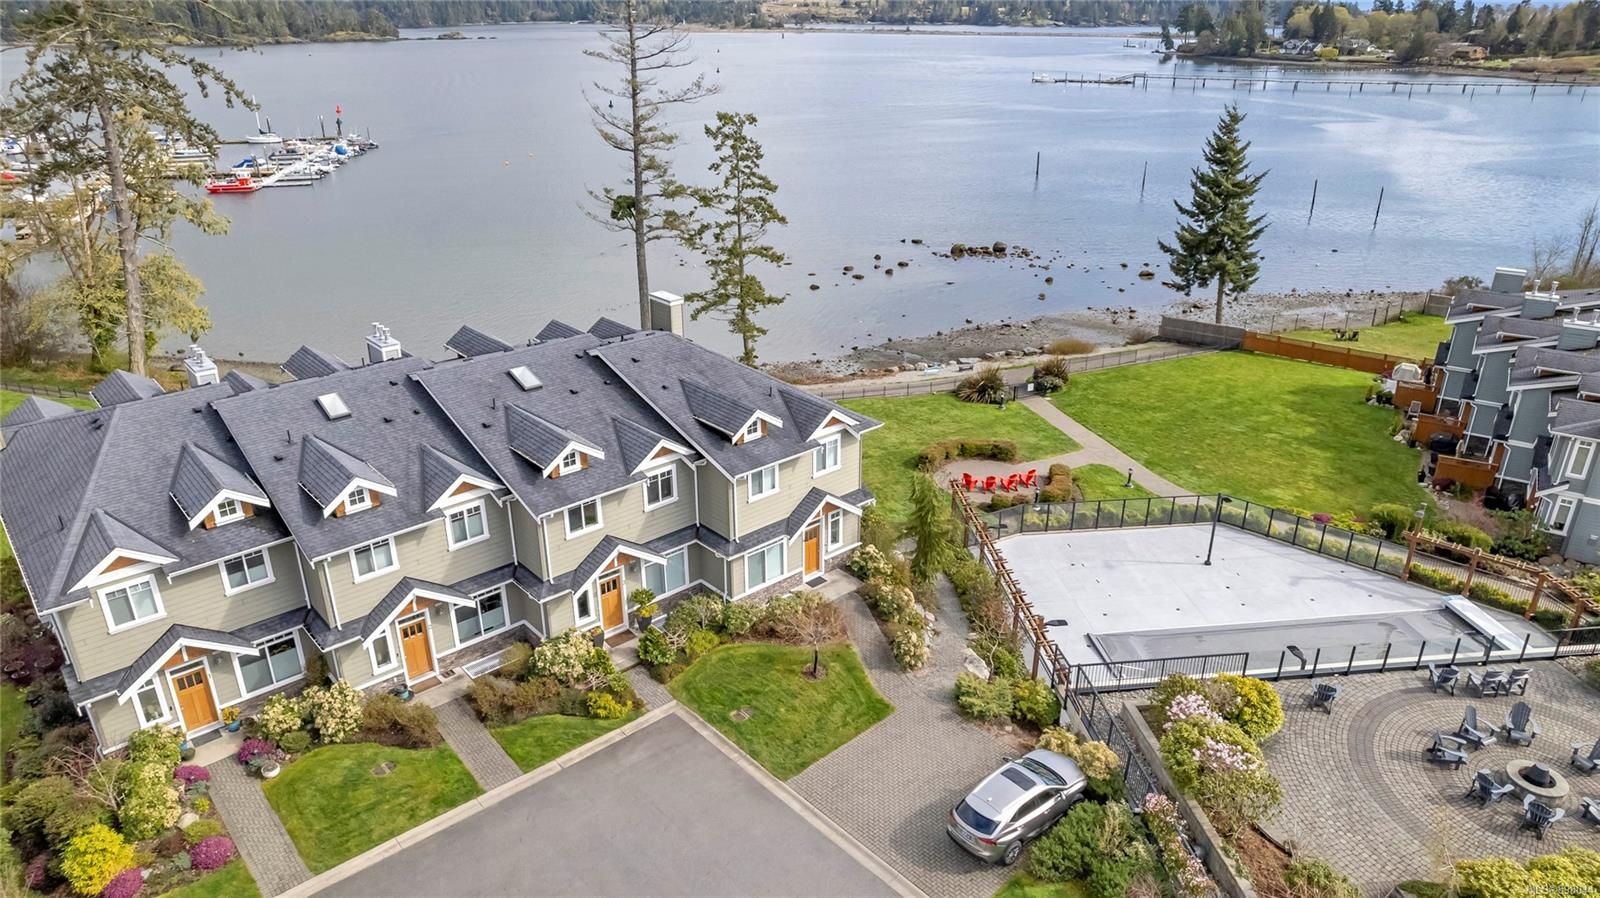 Open House. Open House on Saturday, August 27, 2022 11:00AM - 12:00PM
Stunning Oceanfront Sooke Townhouse in Heron View with 4 bedrooms and 4 bathrooms and all the amenities you can imagine. Open house this SATURDAY August 27th, 11 am to 12pm. $1,199,000.